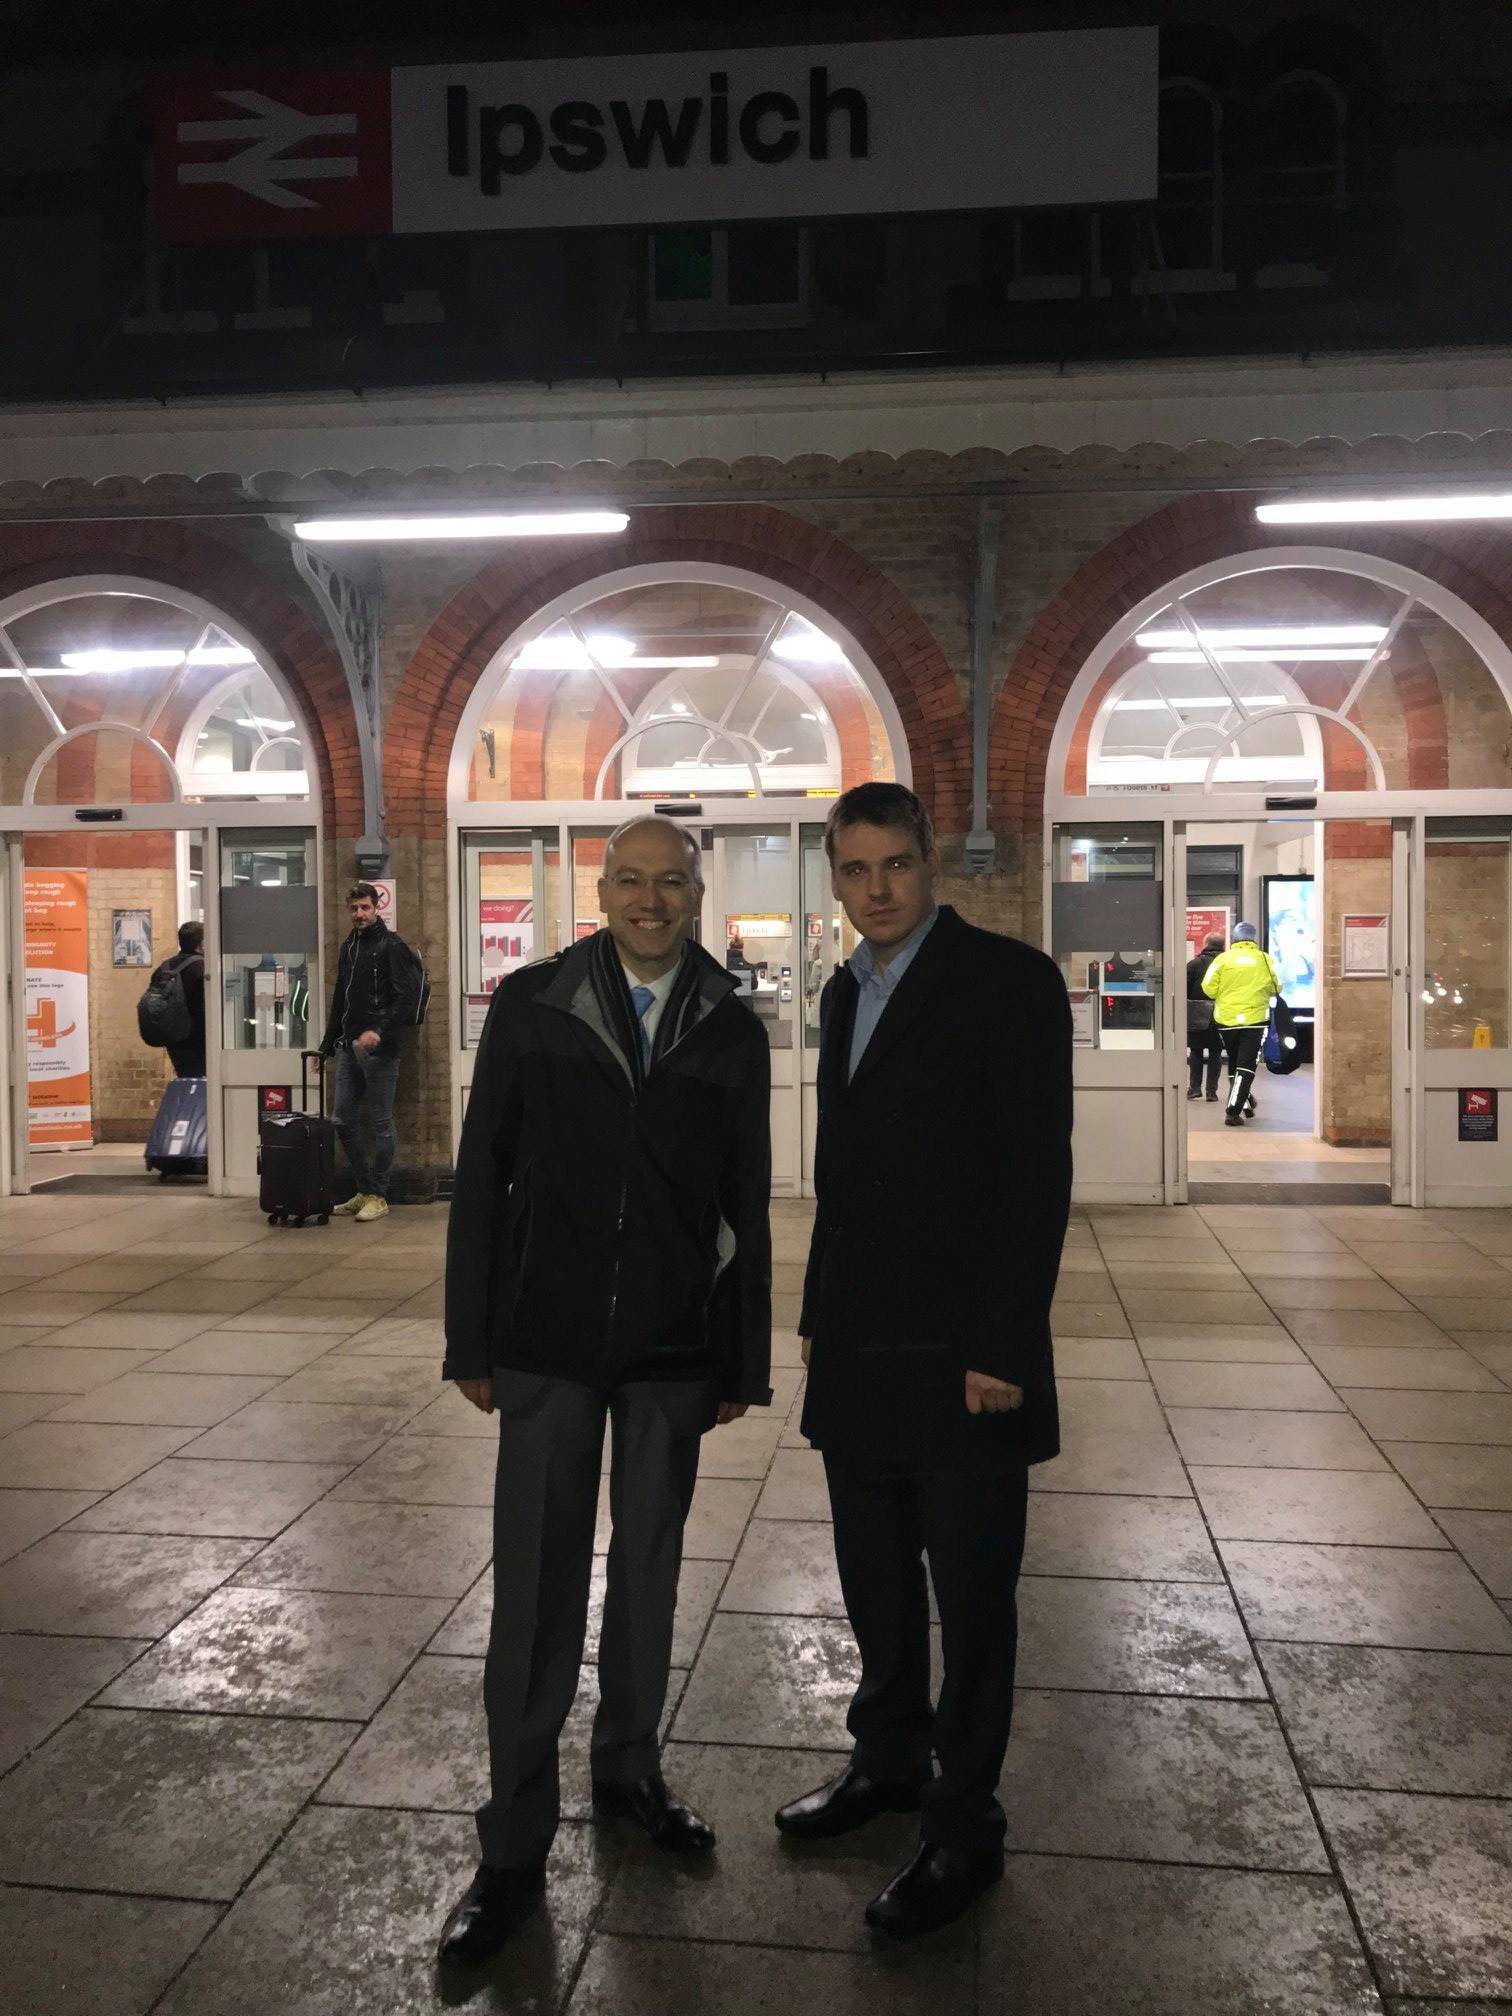 My meeting with Jonathan Denby from Greater Anglia